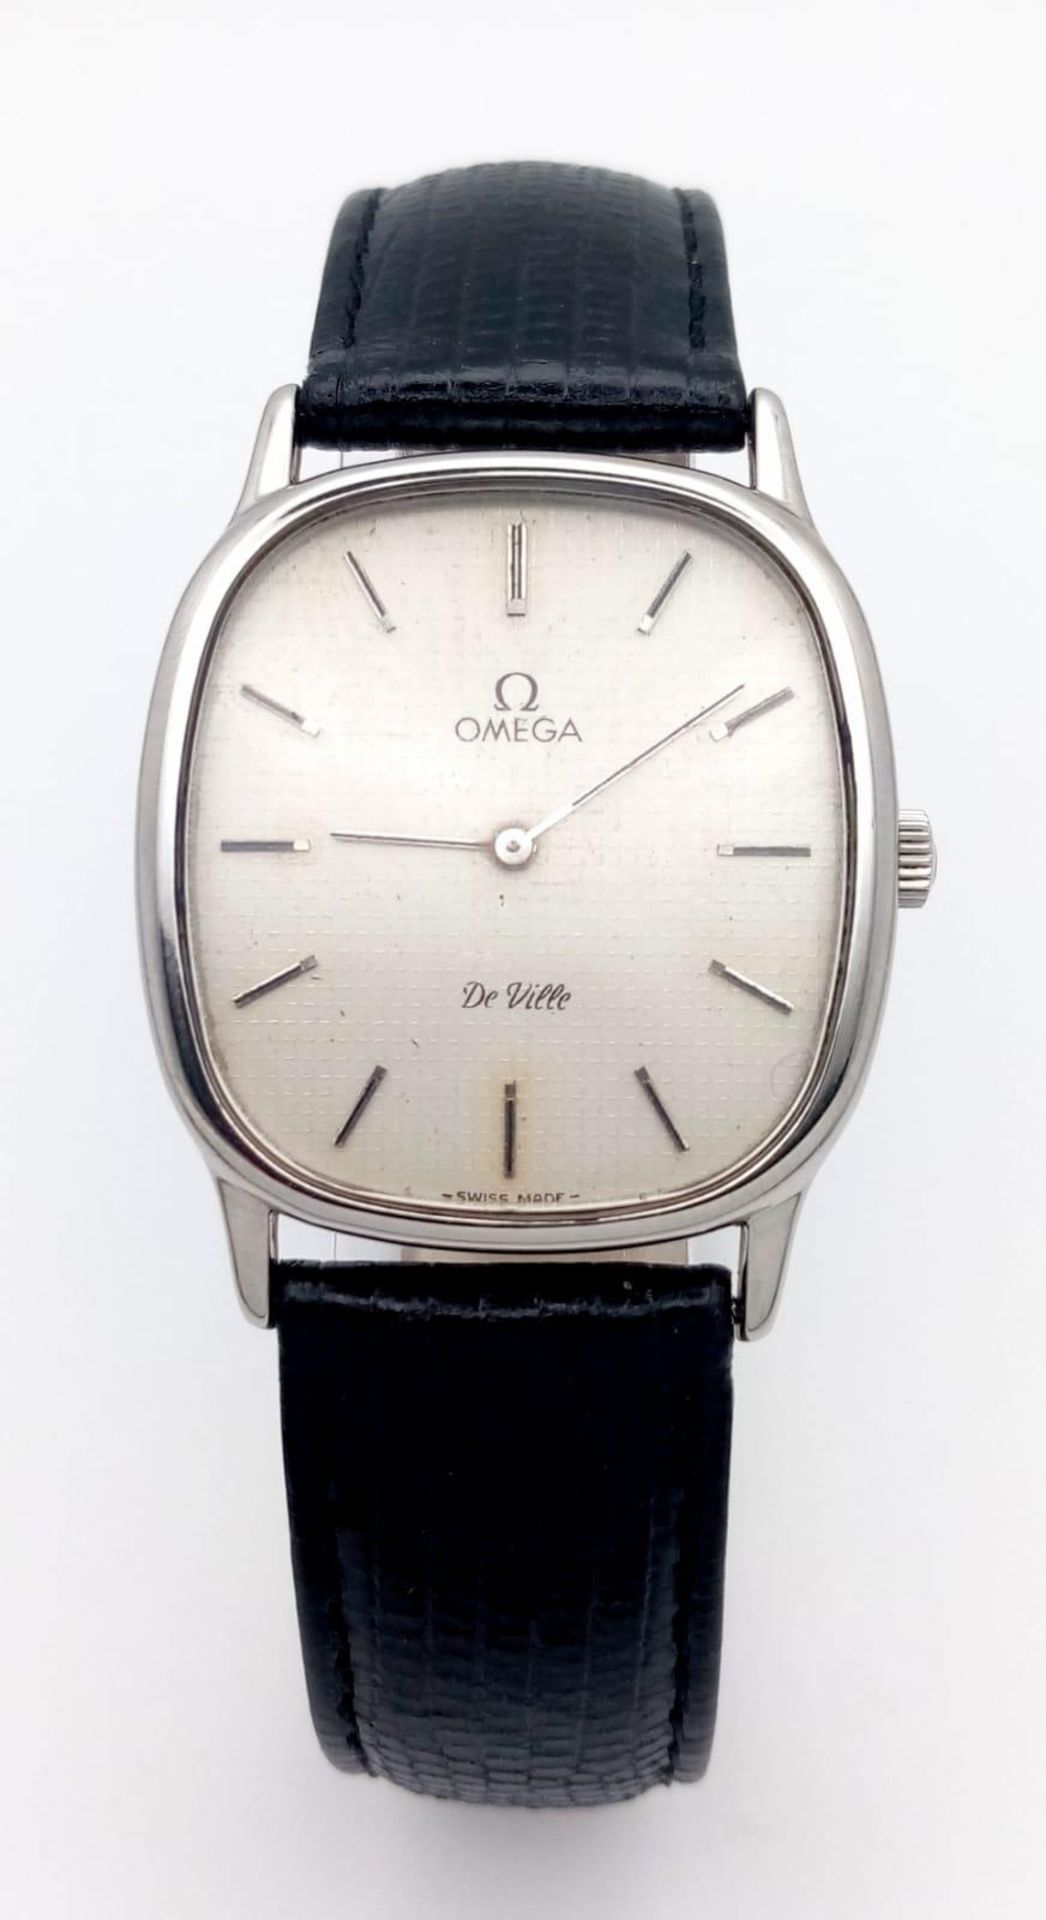 AN OMEGA DE VILLE IN STAINLESS STEEL WITH MANUAL WINDING MOVEMENT AND ON A BLACK LEATHER STRAP . - Image 2 of 6